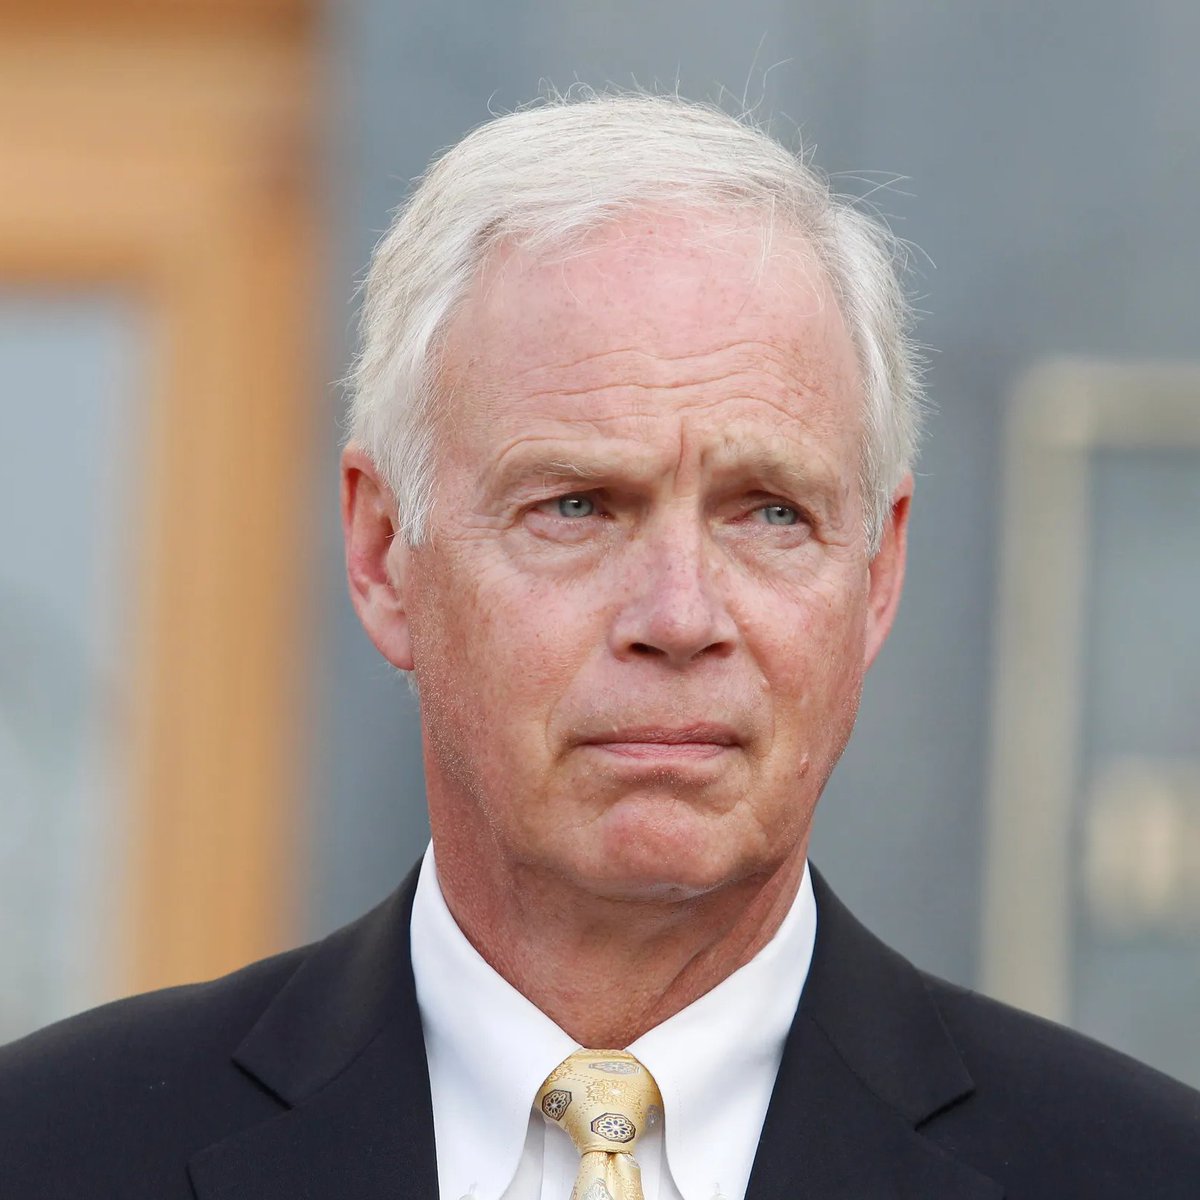 Disgusting: Senator Ron Johnson, one of the wealthiest sitting Senators and members of Congress, believes that Social Security unfairly taxes millionaires and billionaires to support Americans in lower tax brackets. Johnson, whose net worth is estimated at $78 million, spoke…